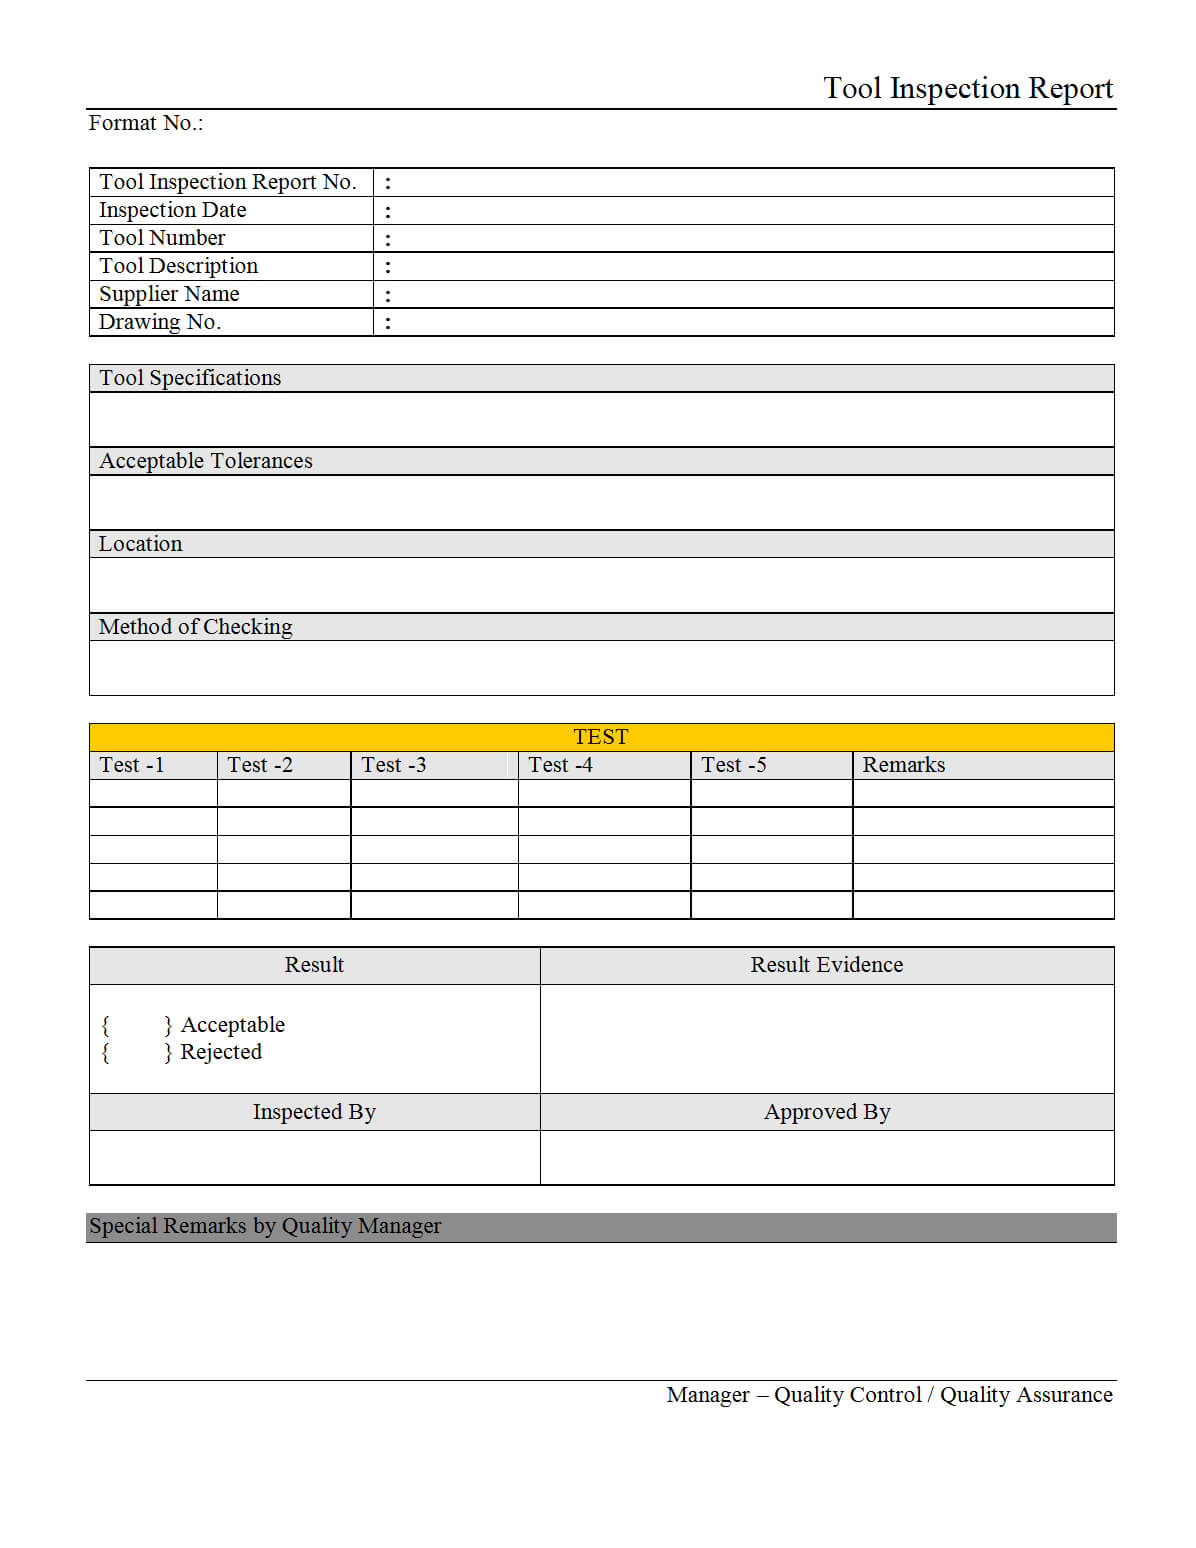 Tool Inspection Report – Inside Part Inspection Report Template